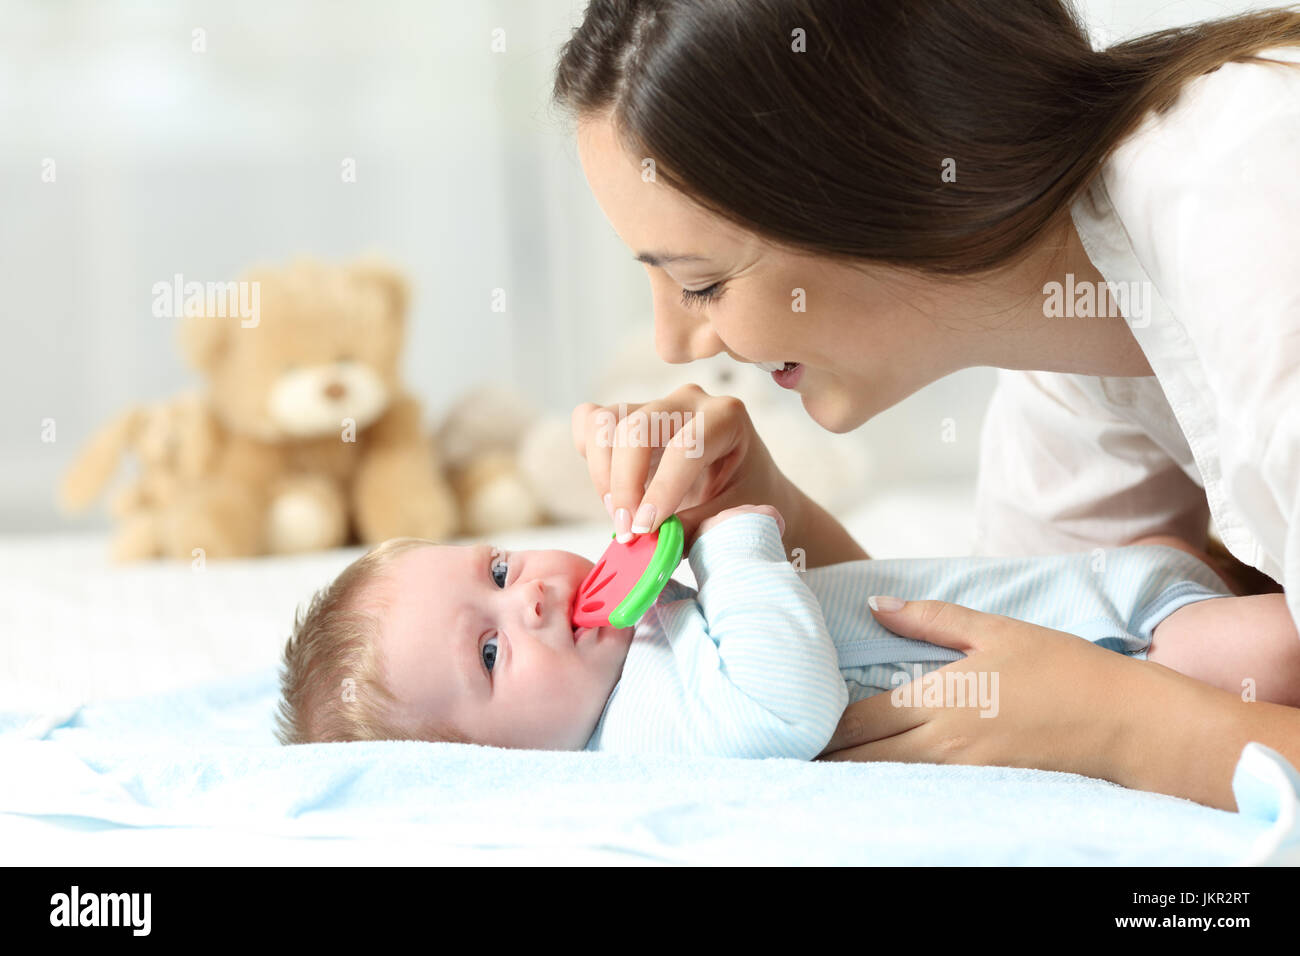 Happy mother giving a bitter to her baby on a bed Stock Photo